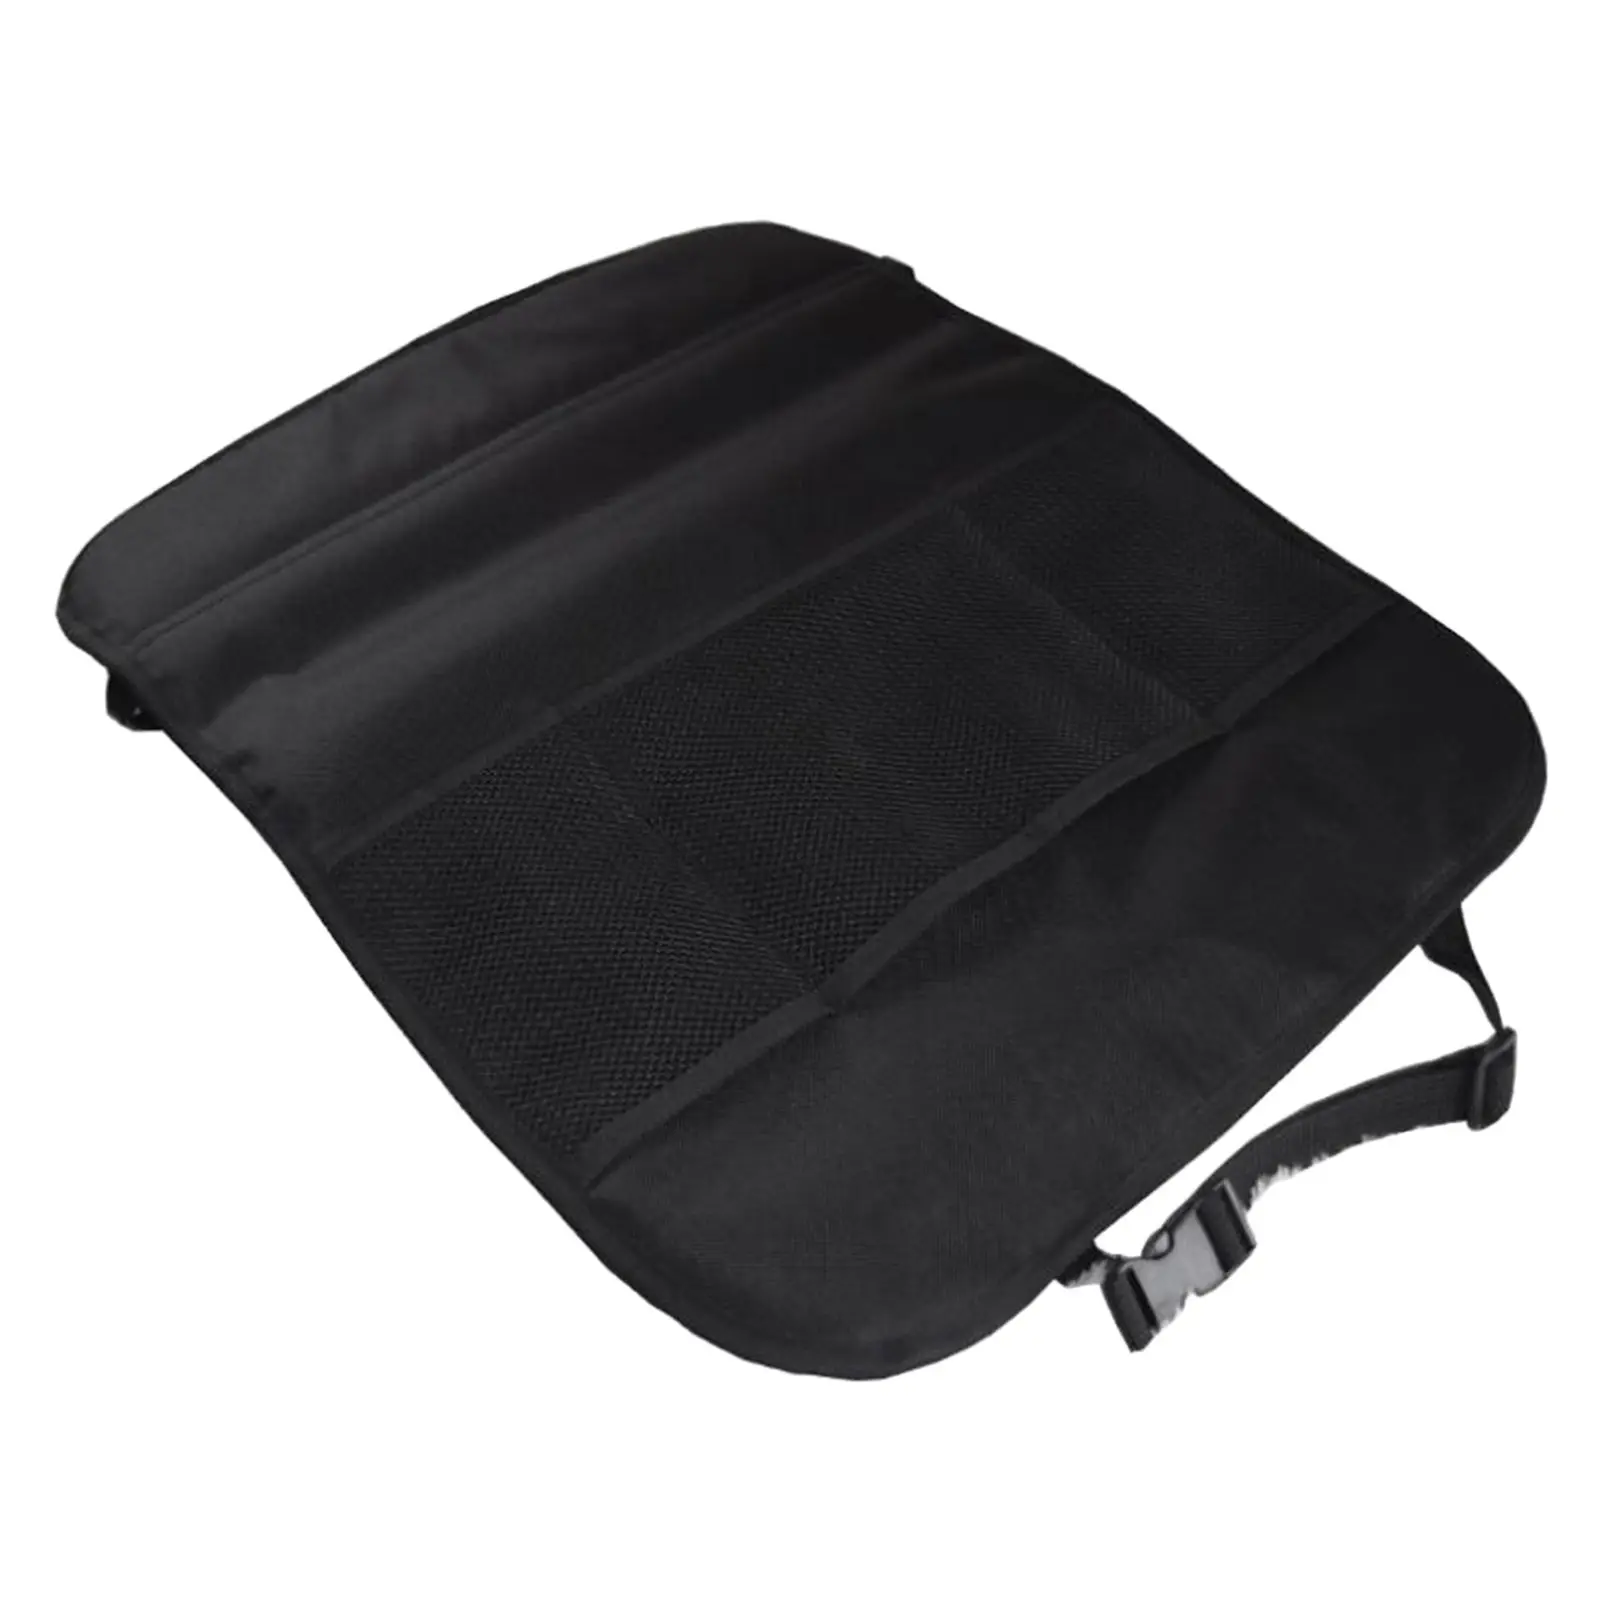 Auto Prevent Trampling Storage Bag Three-Layer Seat Back Anti Kick Pad Auto Back Seat Storage Cover Protector Fit for Kids